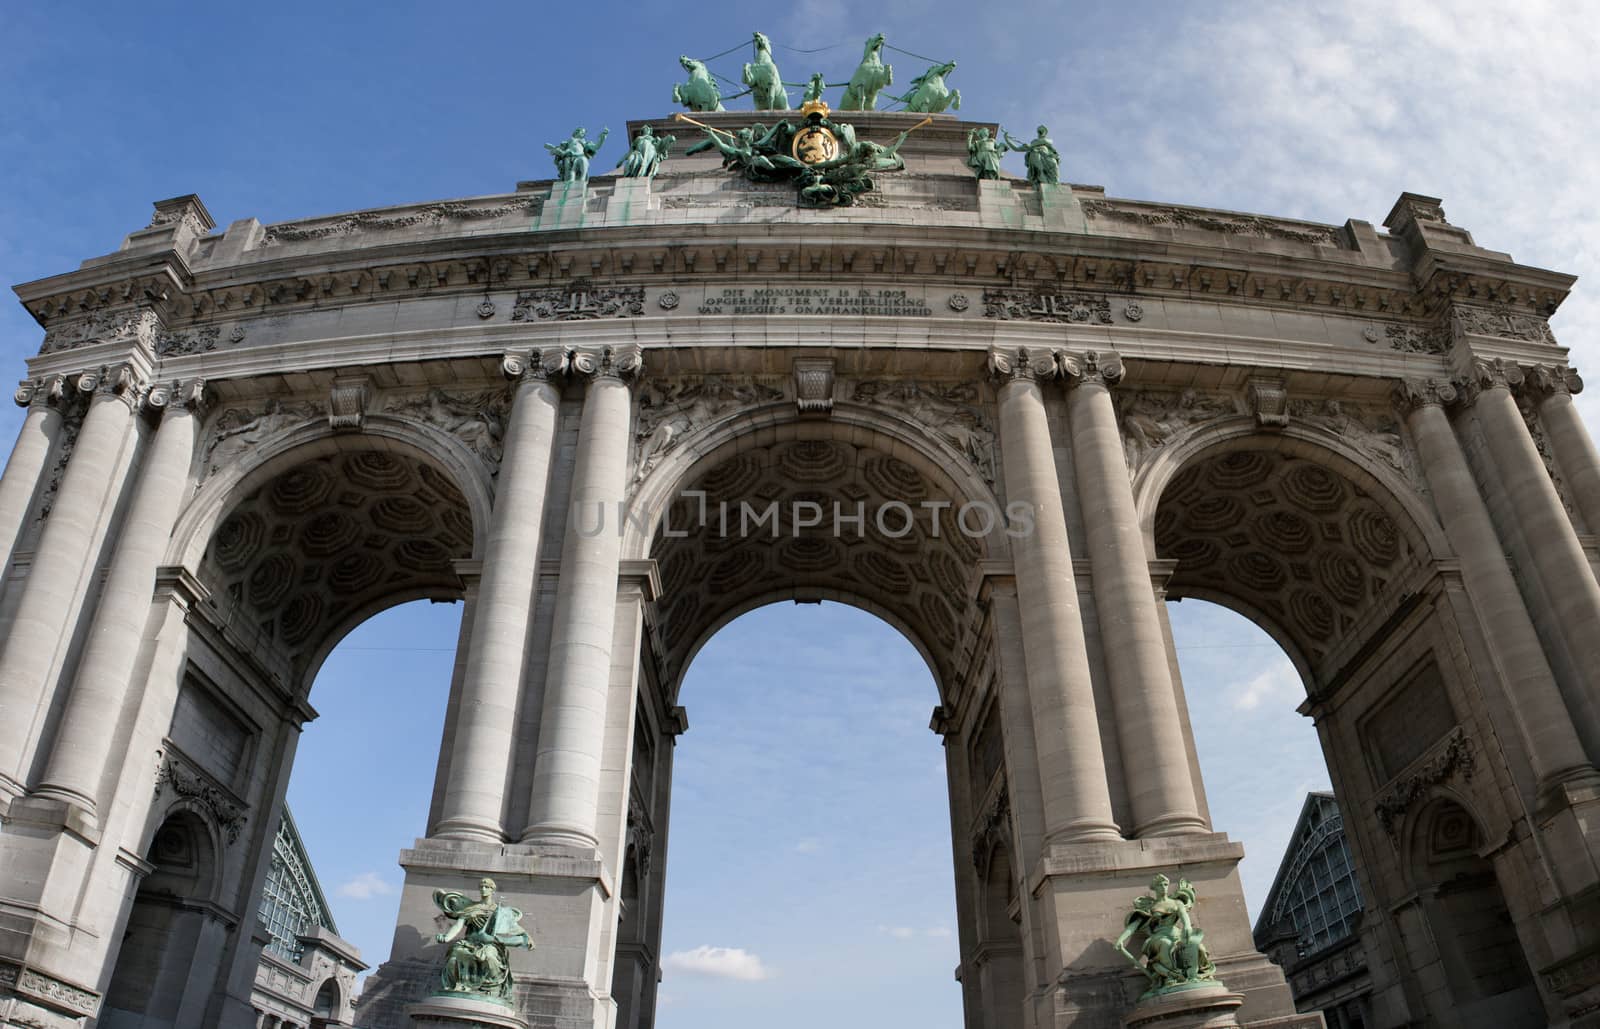 The Triumphal Arch in Brussels by watchtheworld